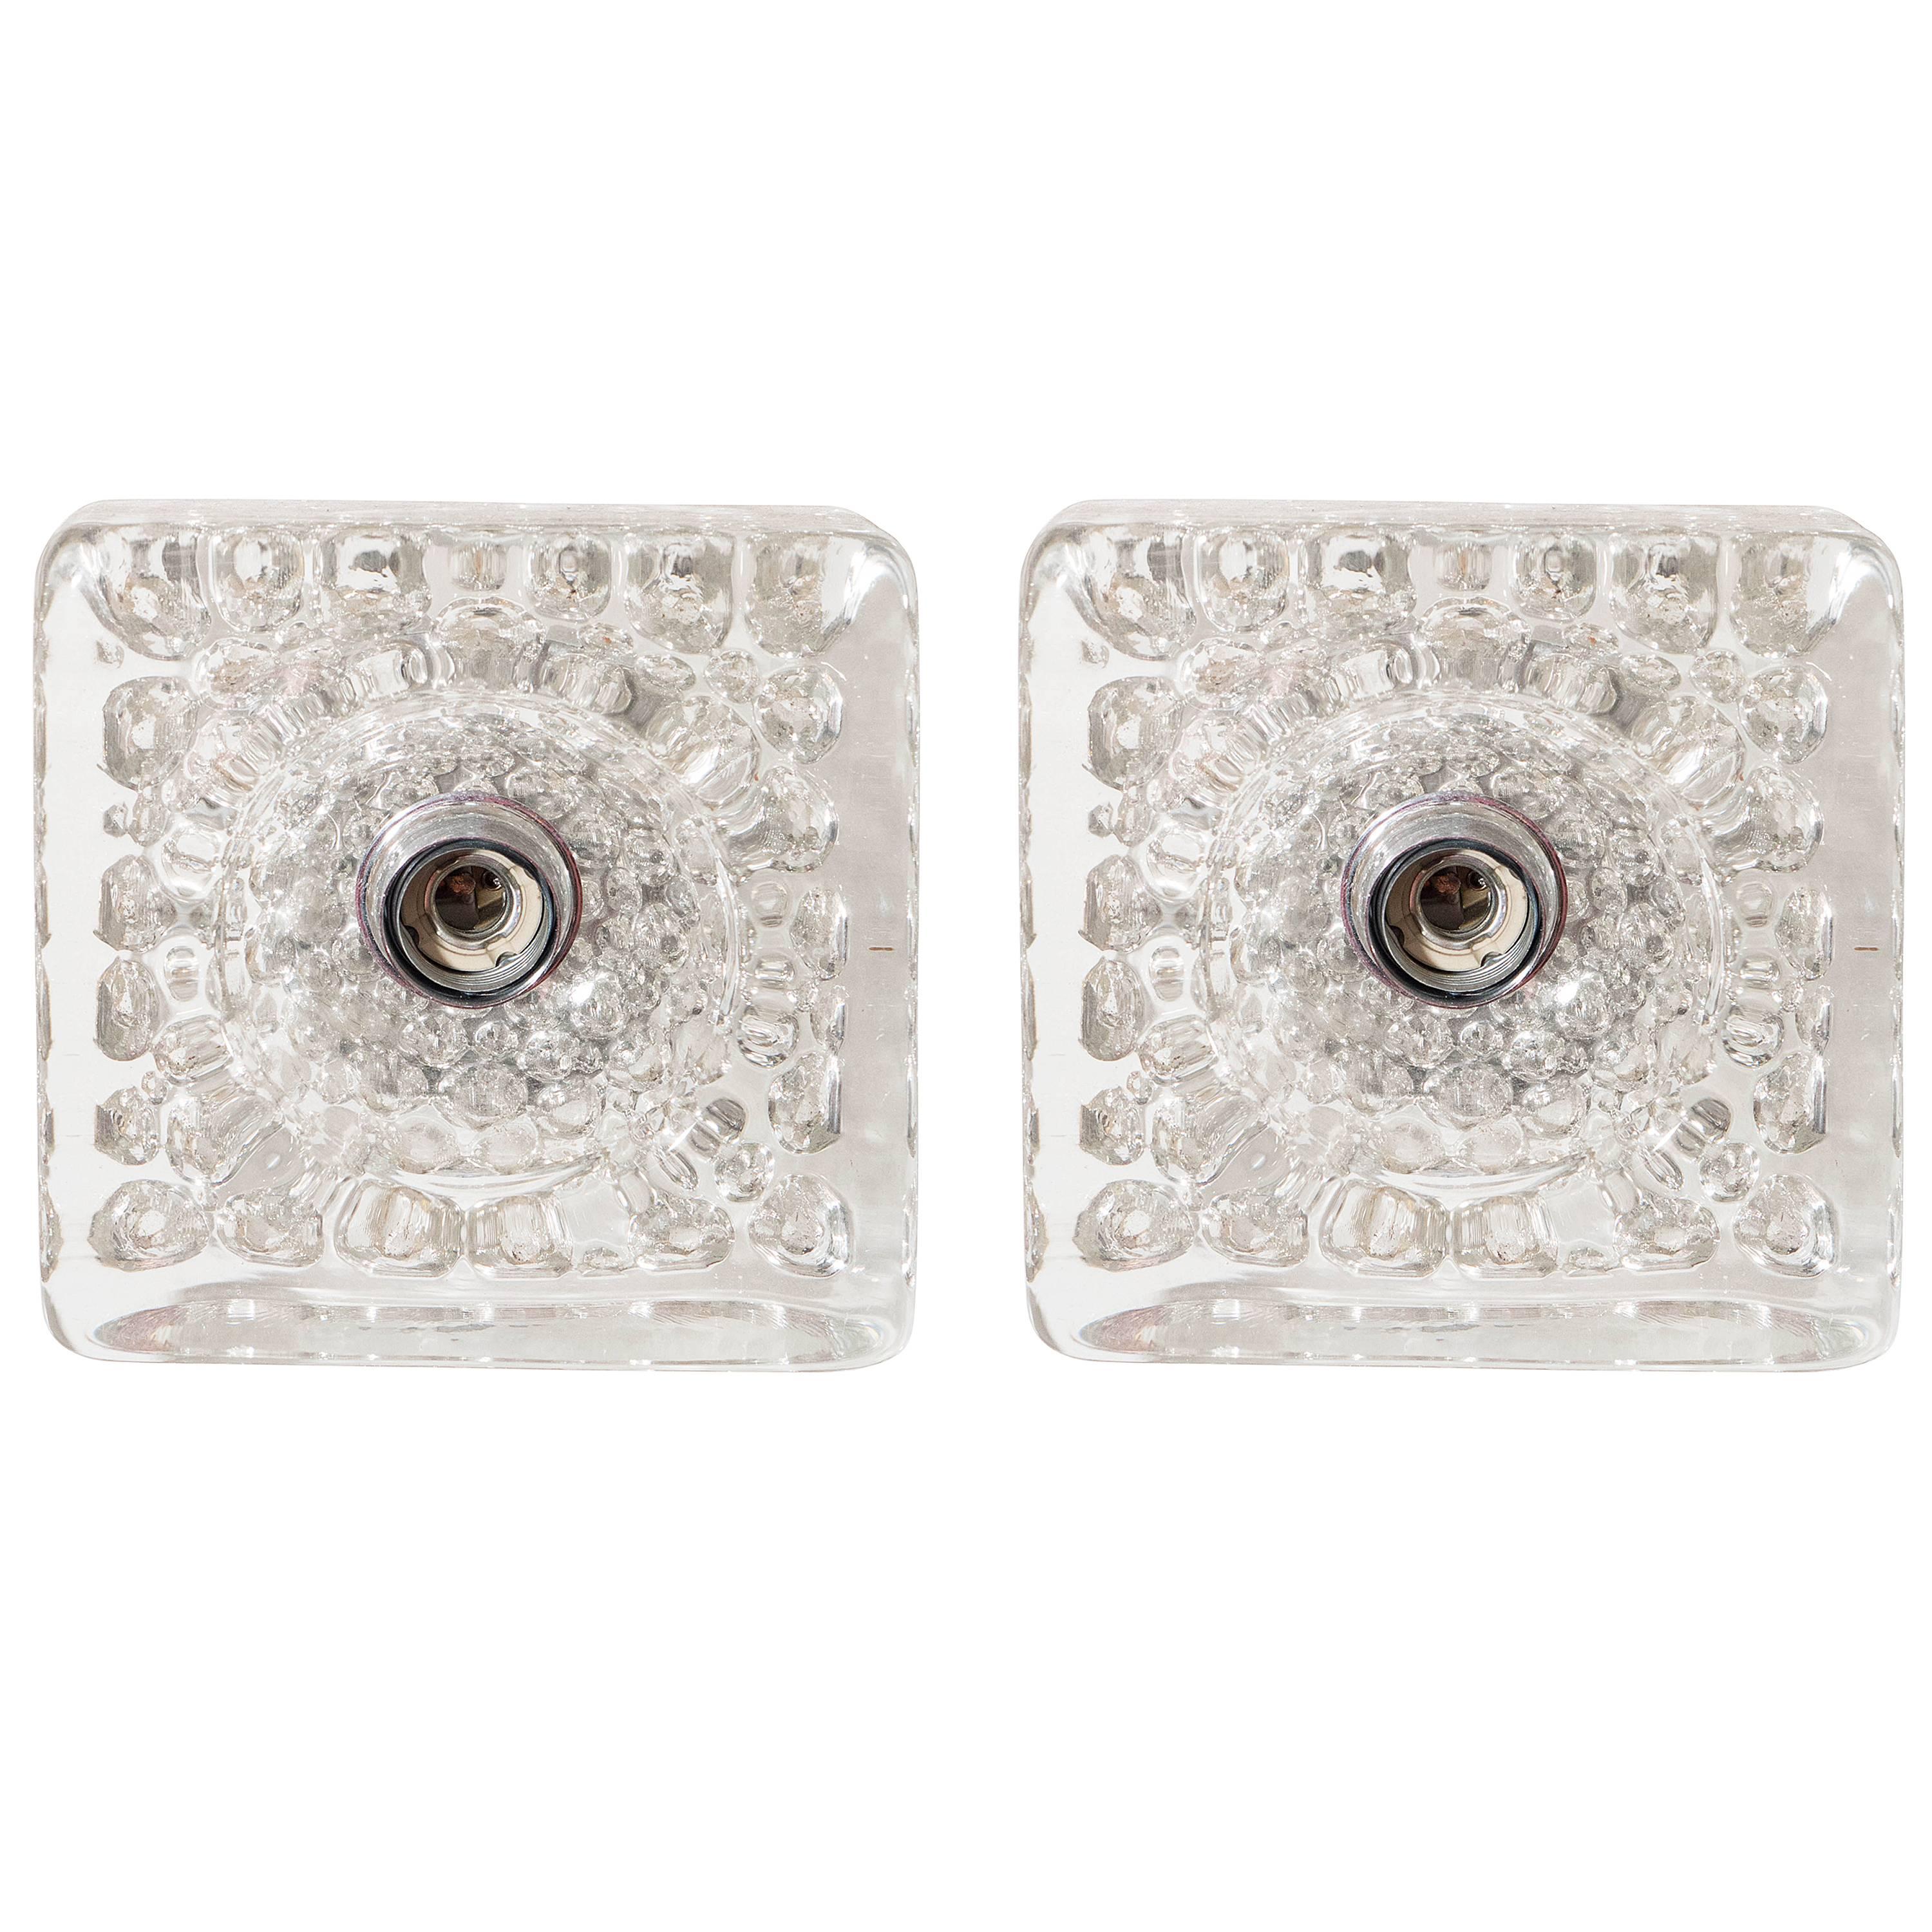 Pair of Bubble Glass Square Wall Sconces